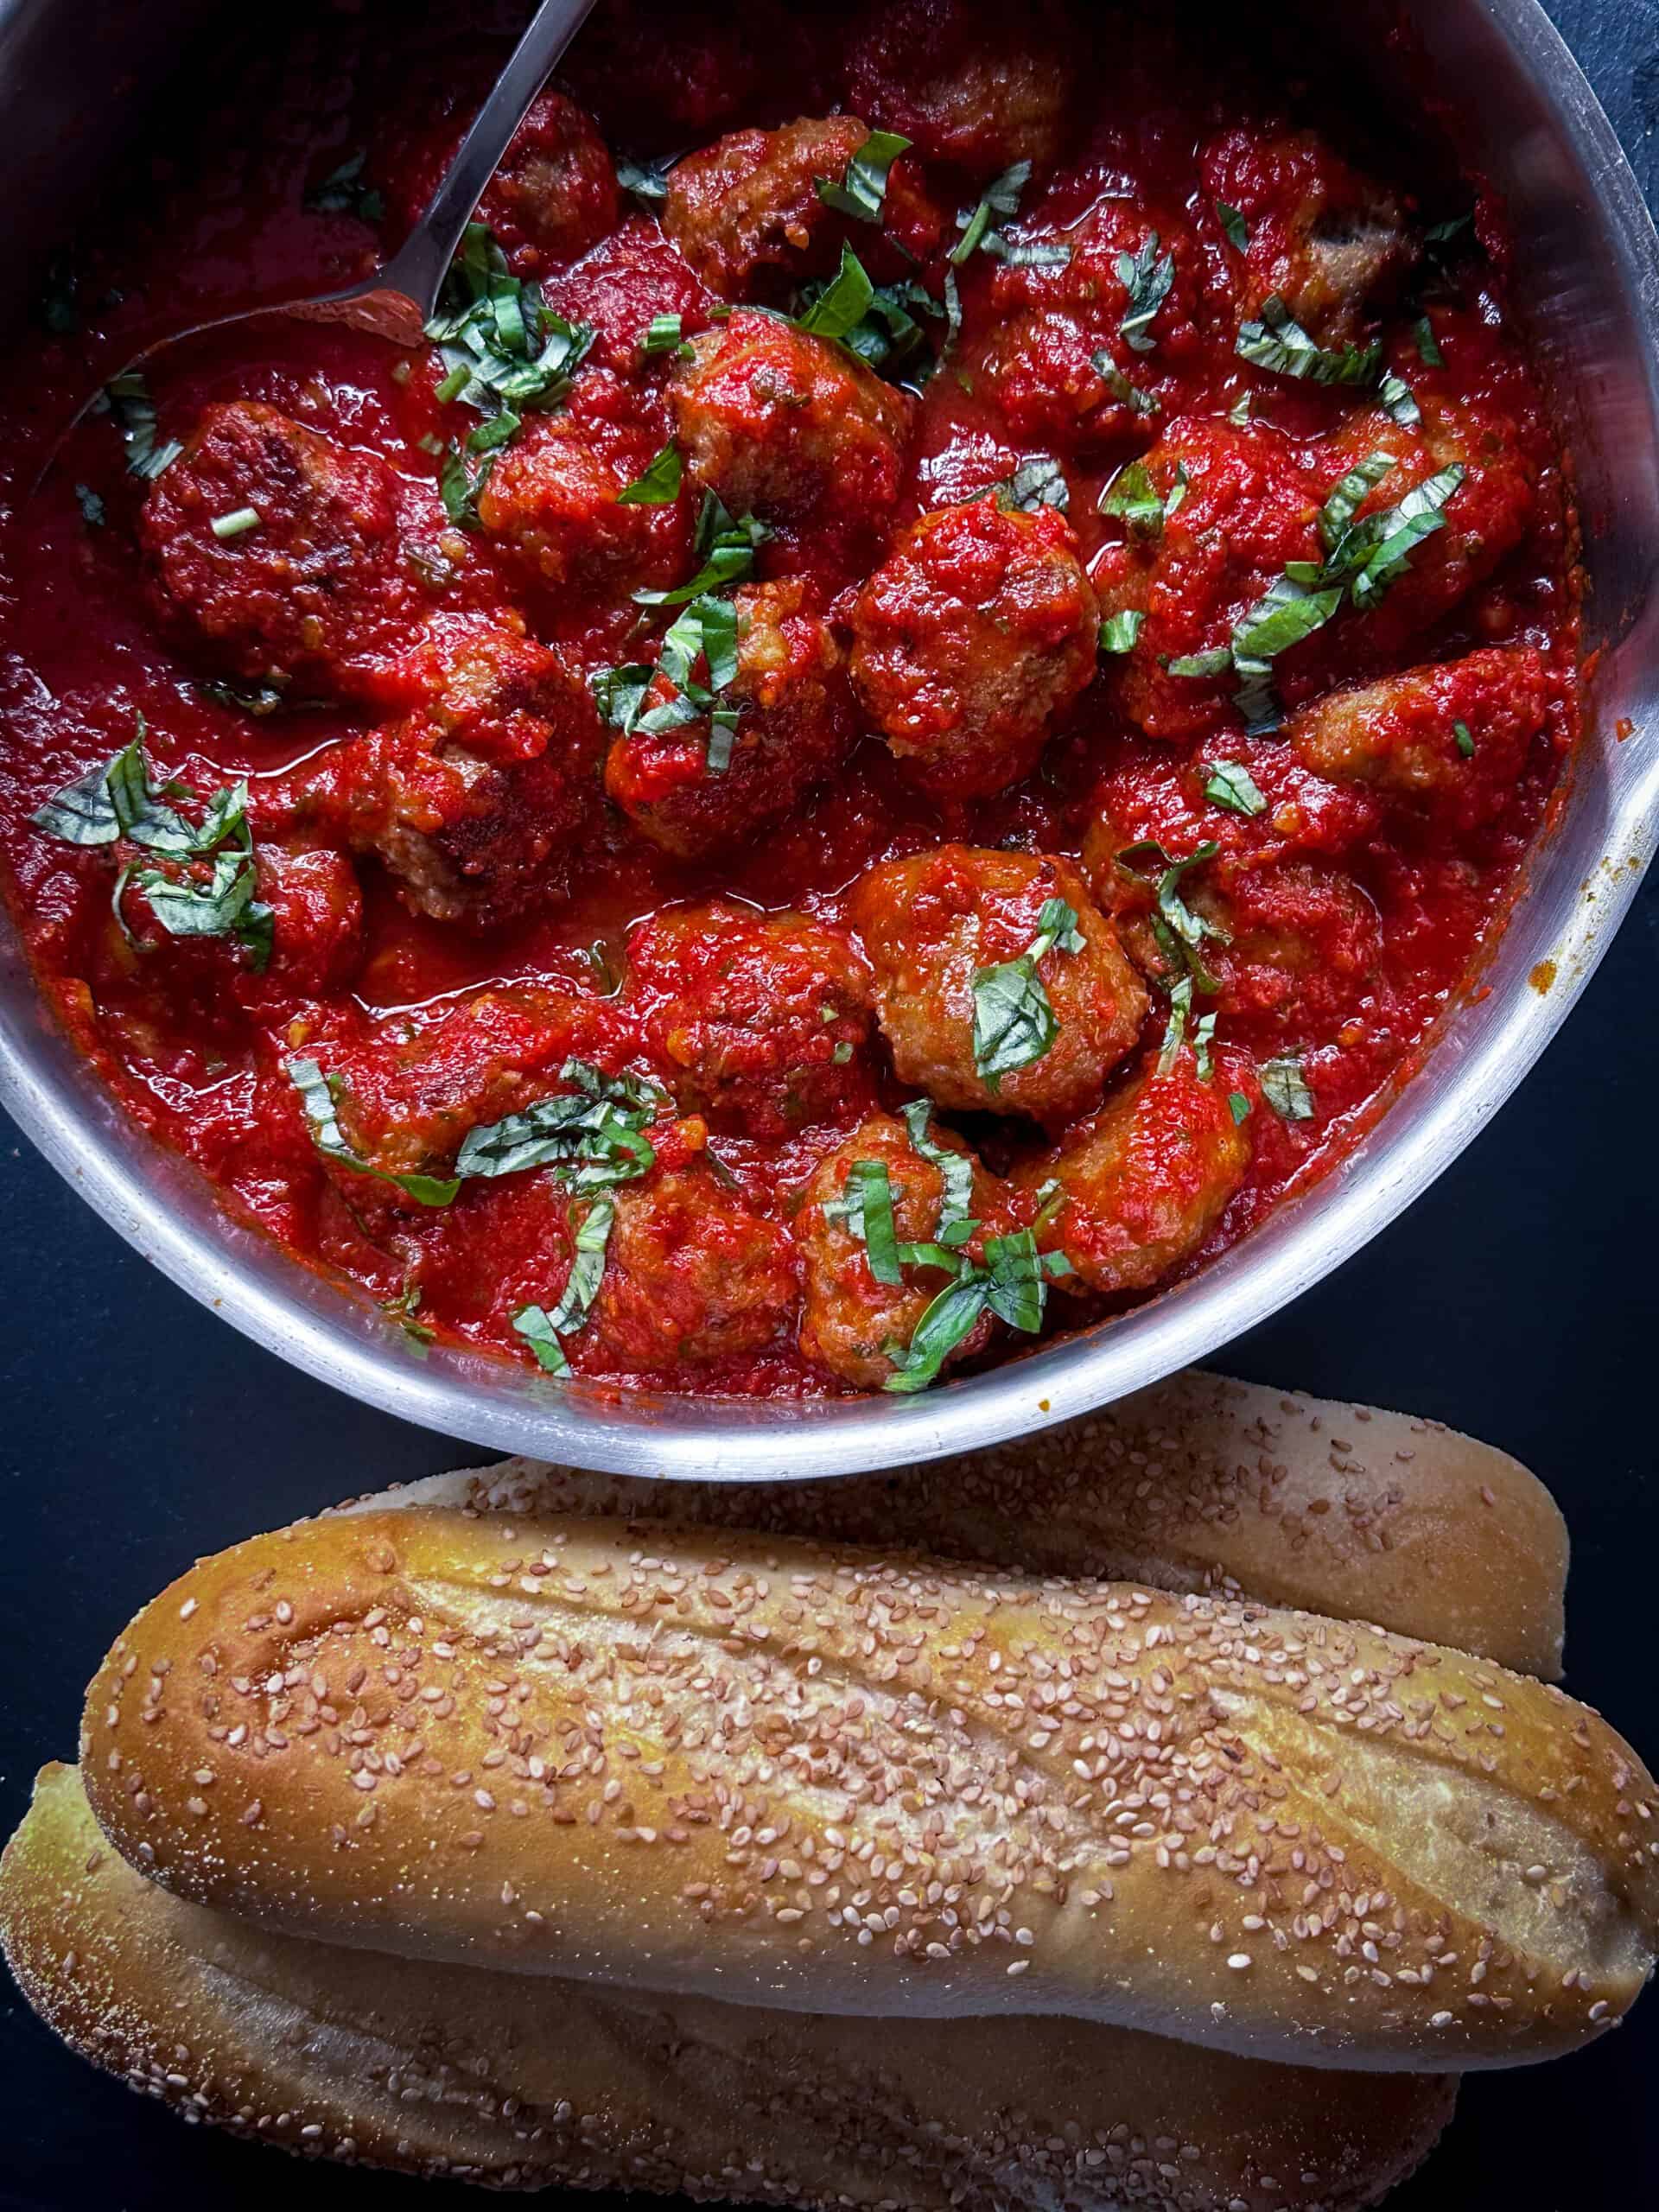 meatballs in pan with seeded rolls nearby